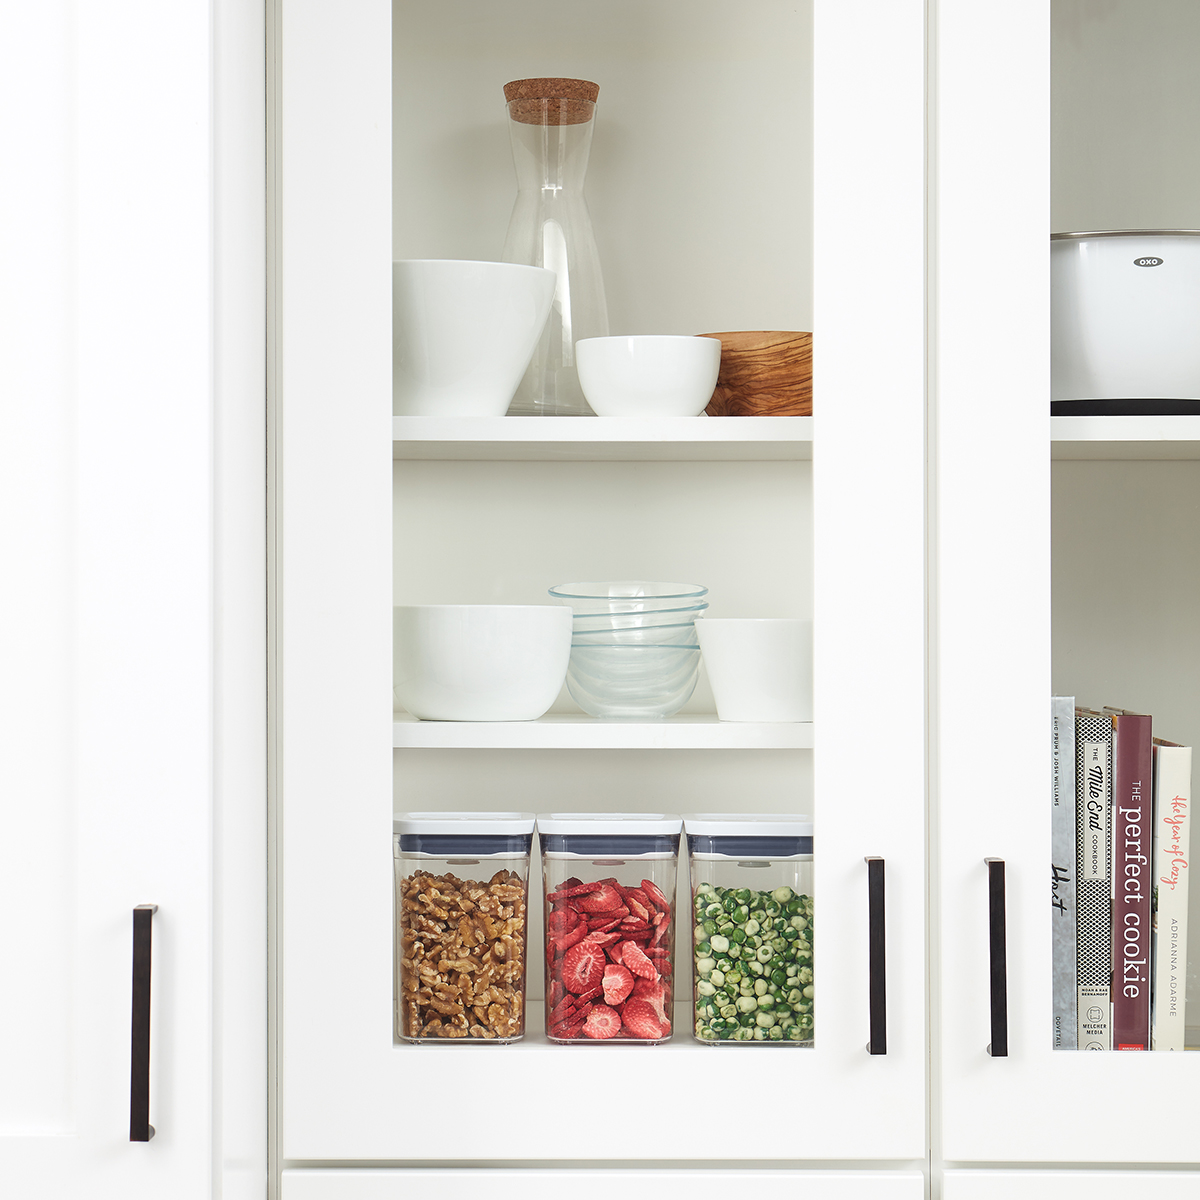 https://www.containerstore.com/catalogimages/368836/10078018-OXO-3-piece-POP-Container-S.jpg